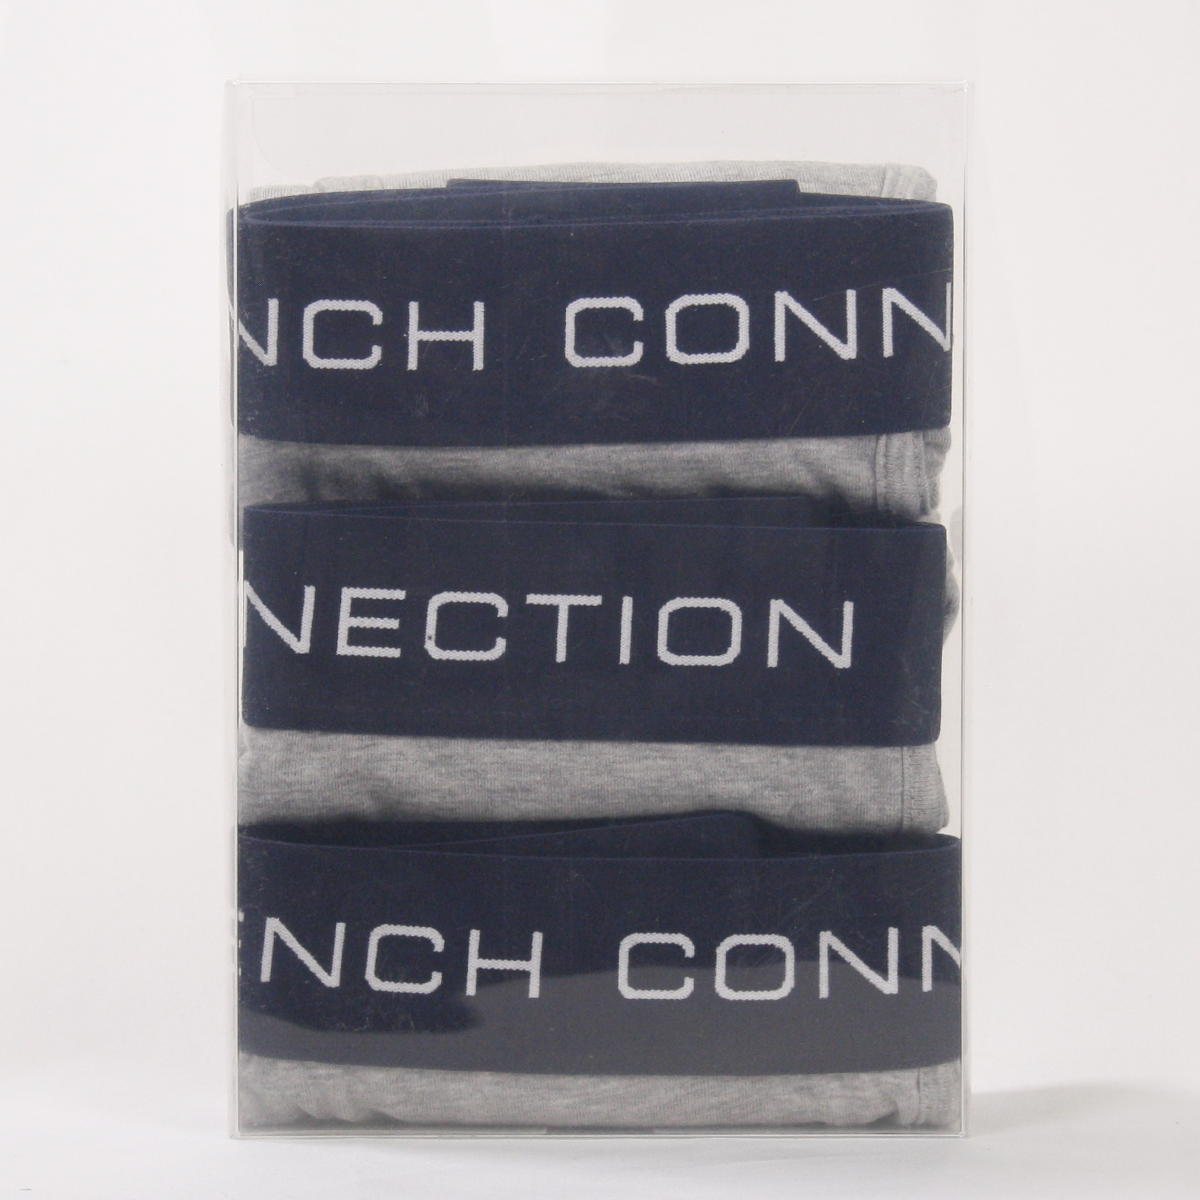 French Connection Men's 3 Pack Grey w/ Navy Blue Strap Boxer Briefs (S10)